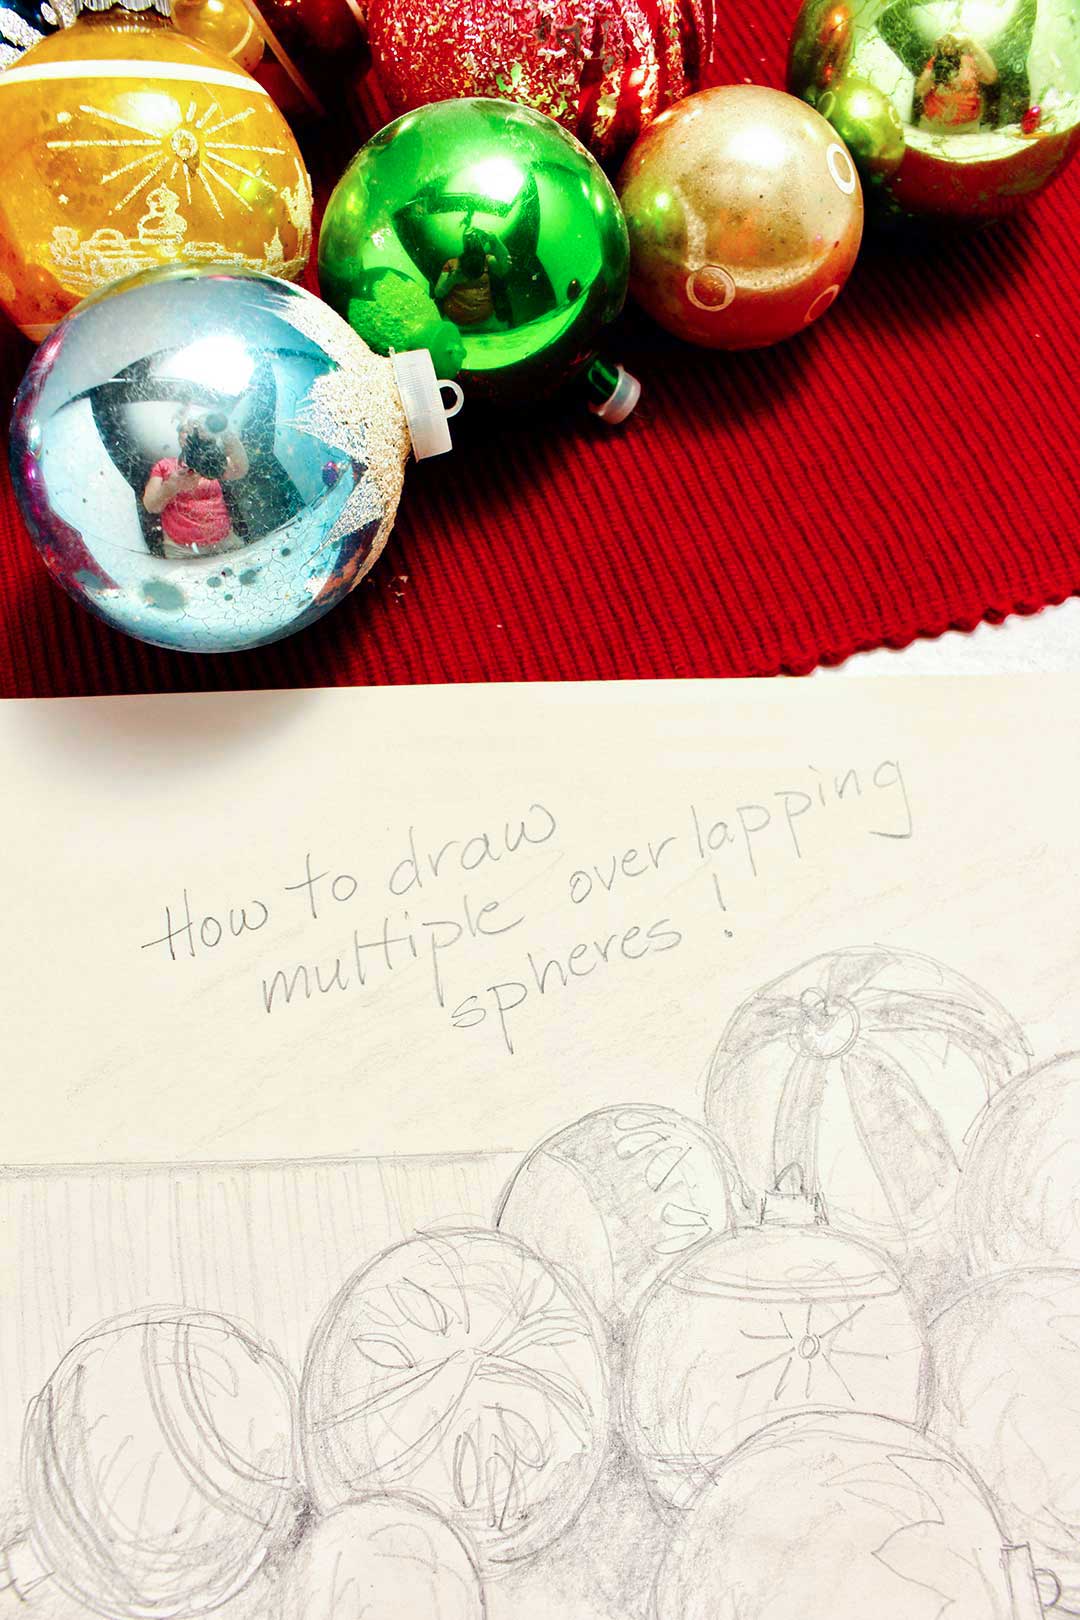 How to Draw a Christmas Present - Welcome To Nana's